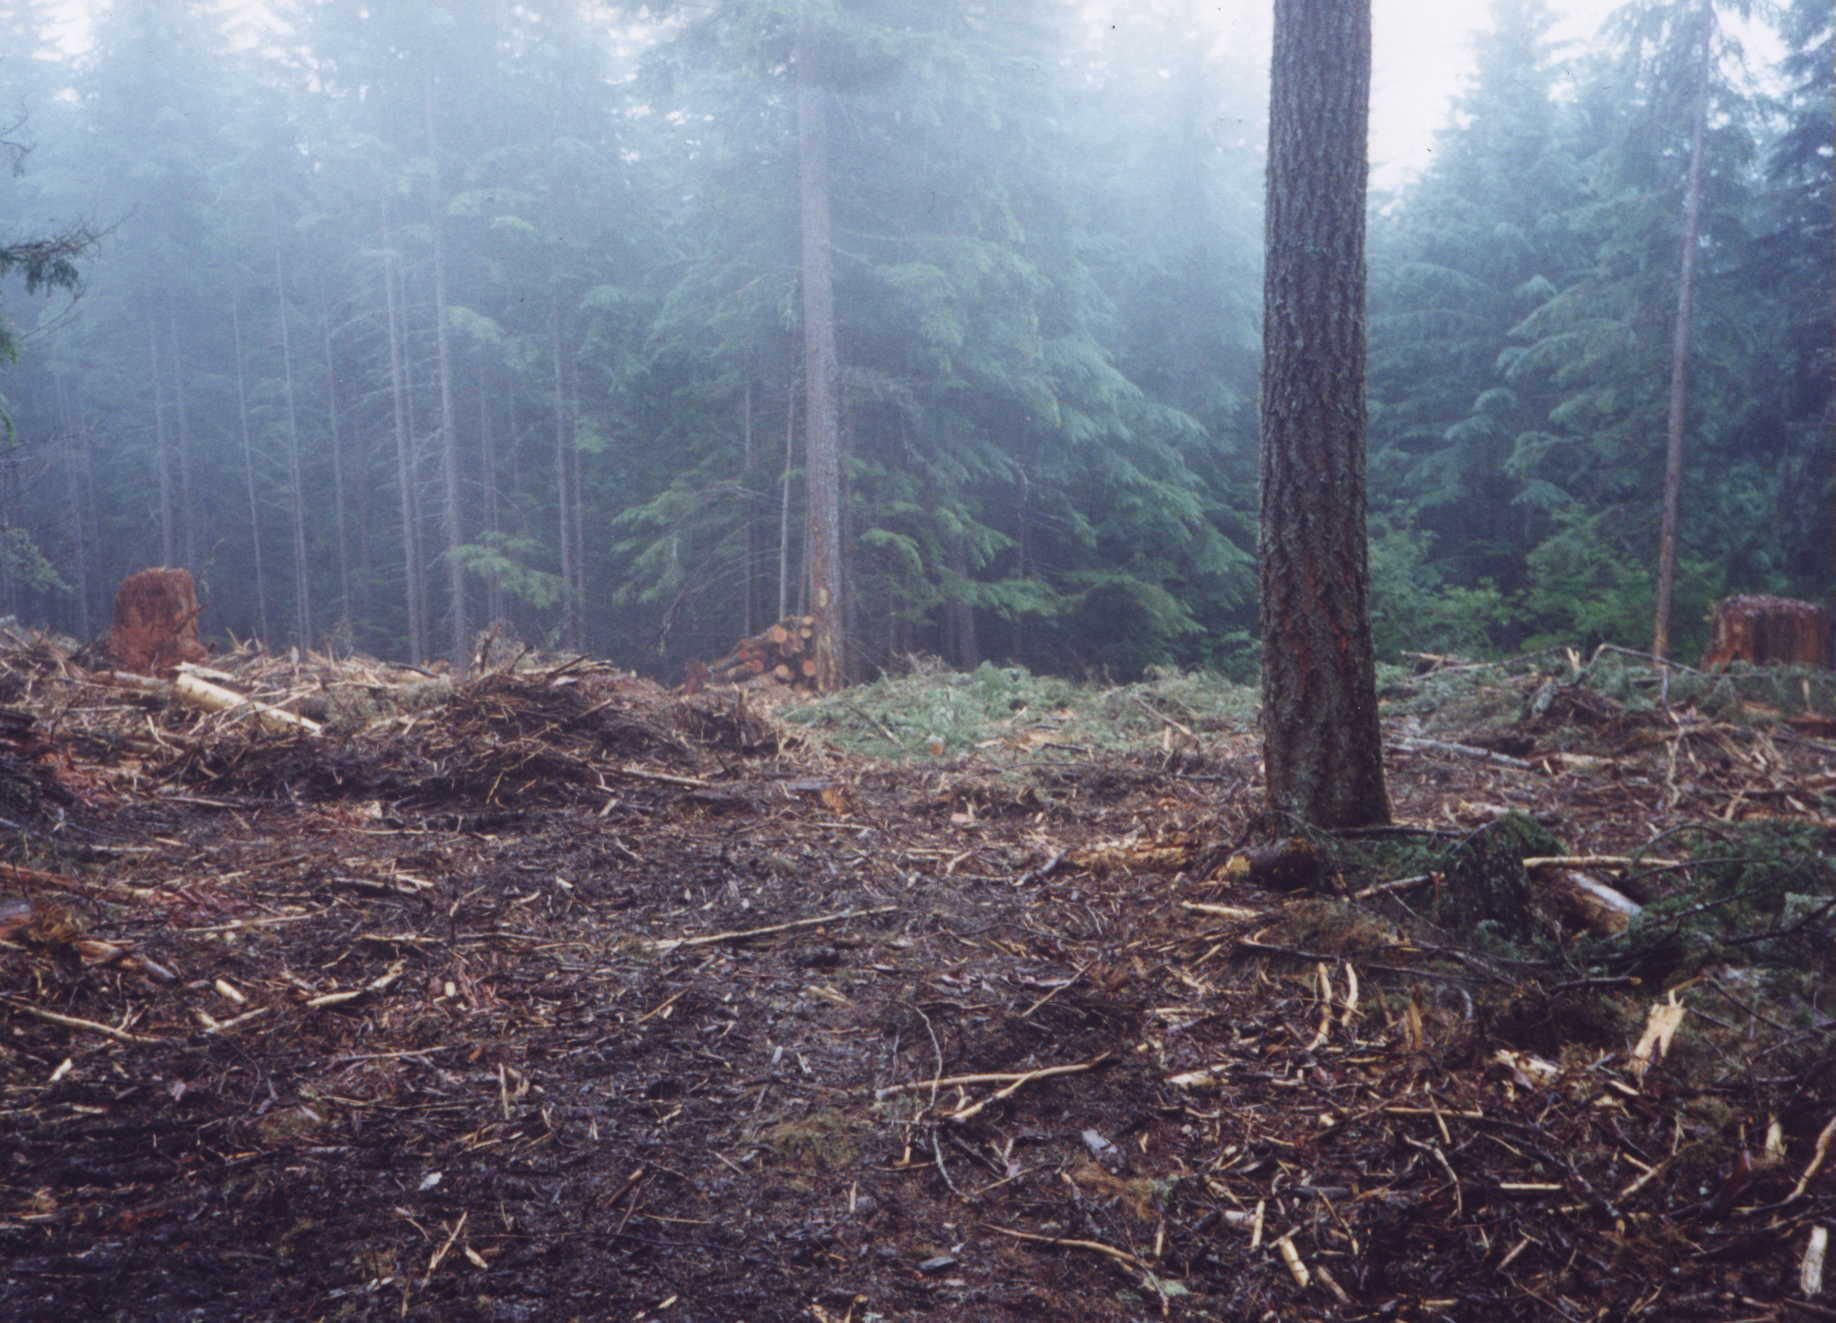 This is a post-logging photo of the Winslow Timber Sale. While the background is logged, there is one tree standing in the forefront of the photo.